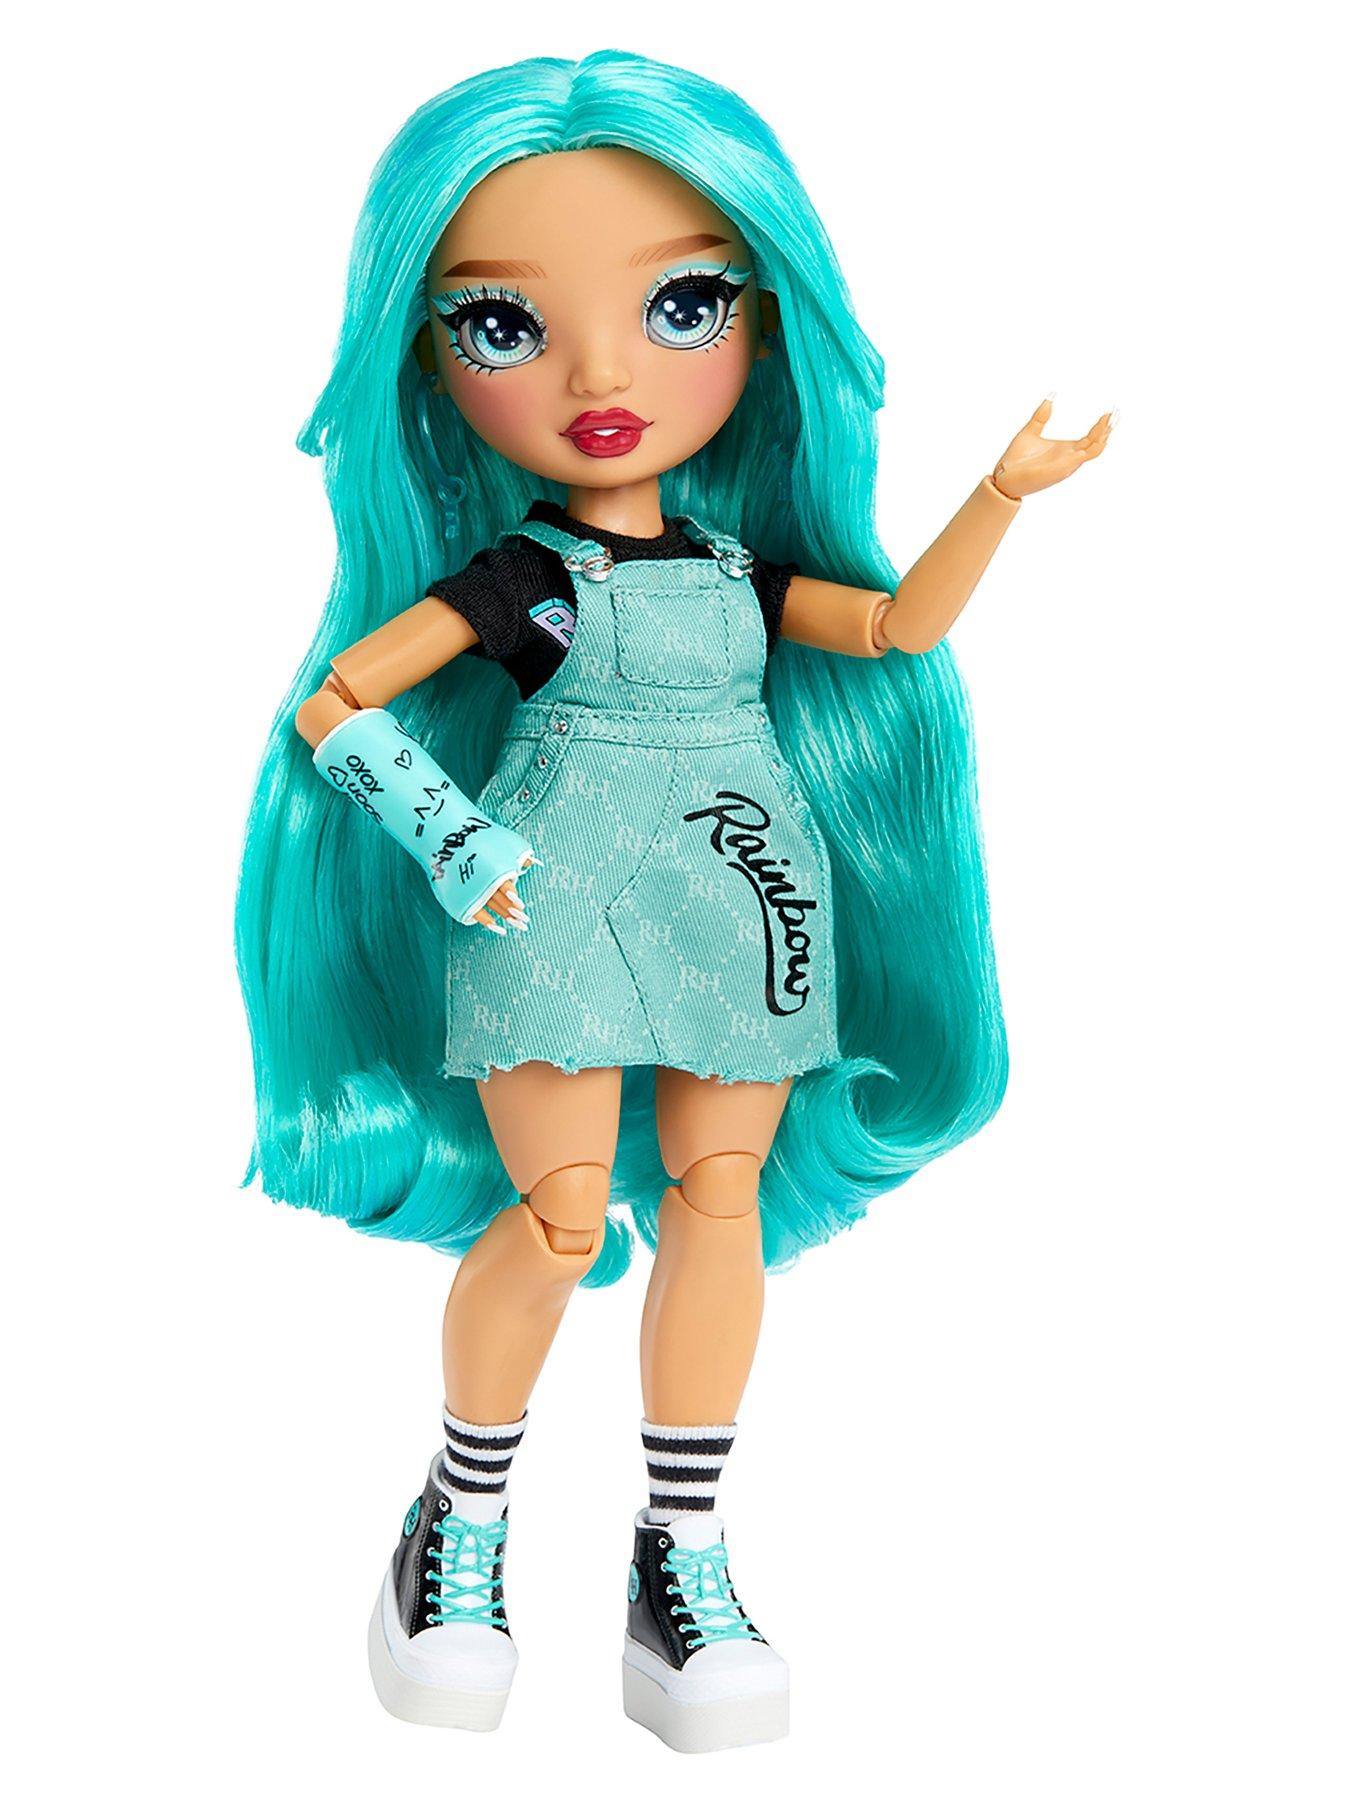 Rainbow High Kia Hart Fashion Doll with 2 Complete Mix & Match Designer  Outfits and Accessories, Fully Posable, Toys for Kids & Gift for  Collectors